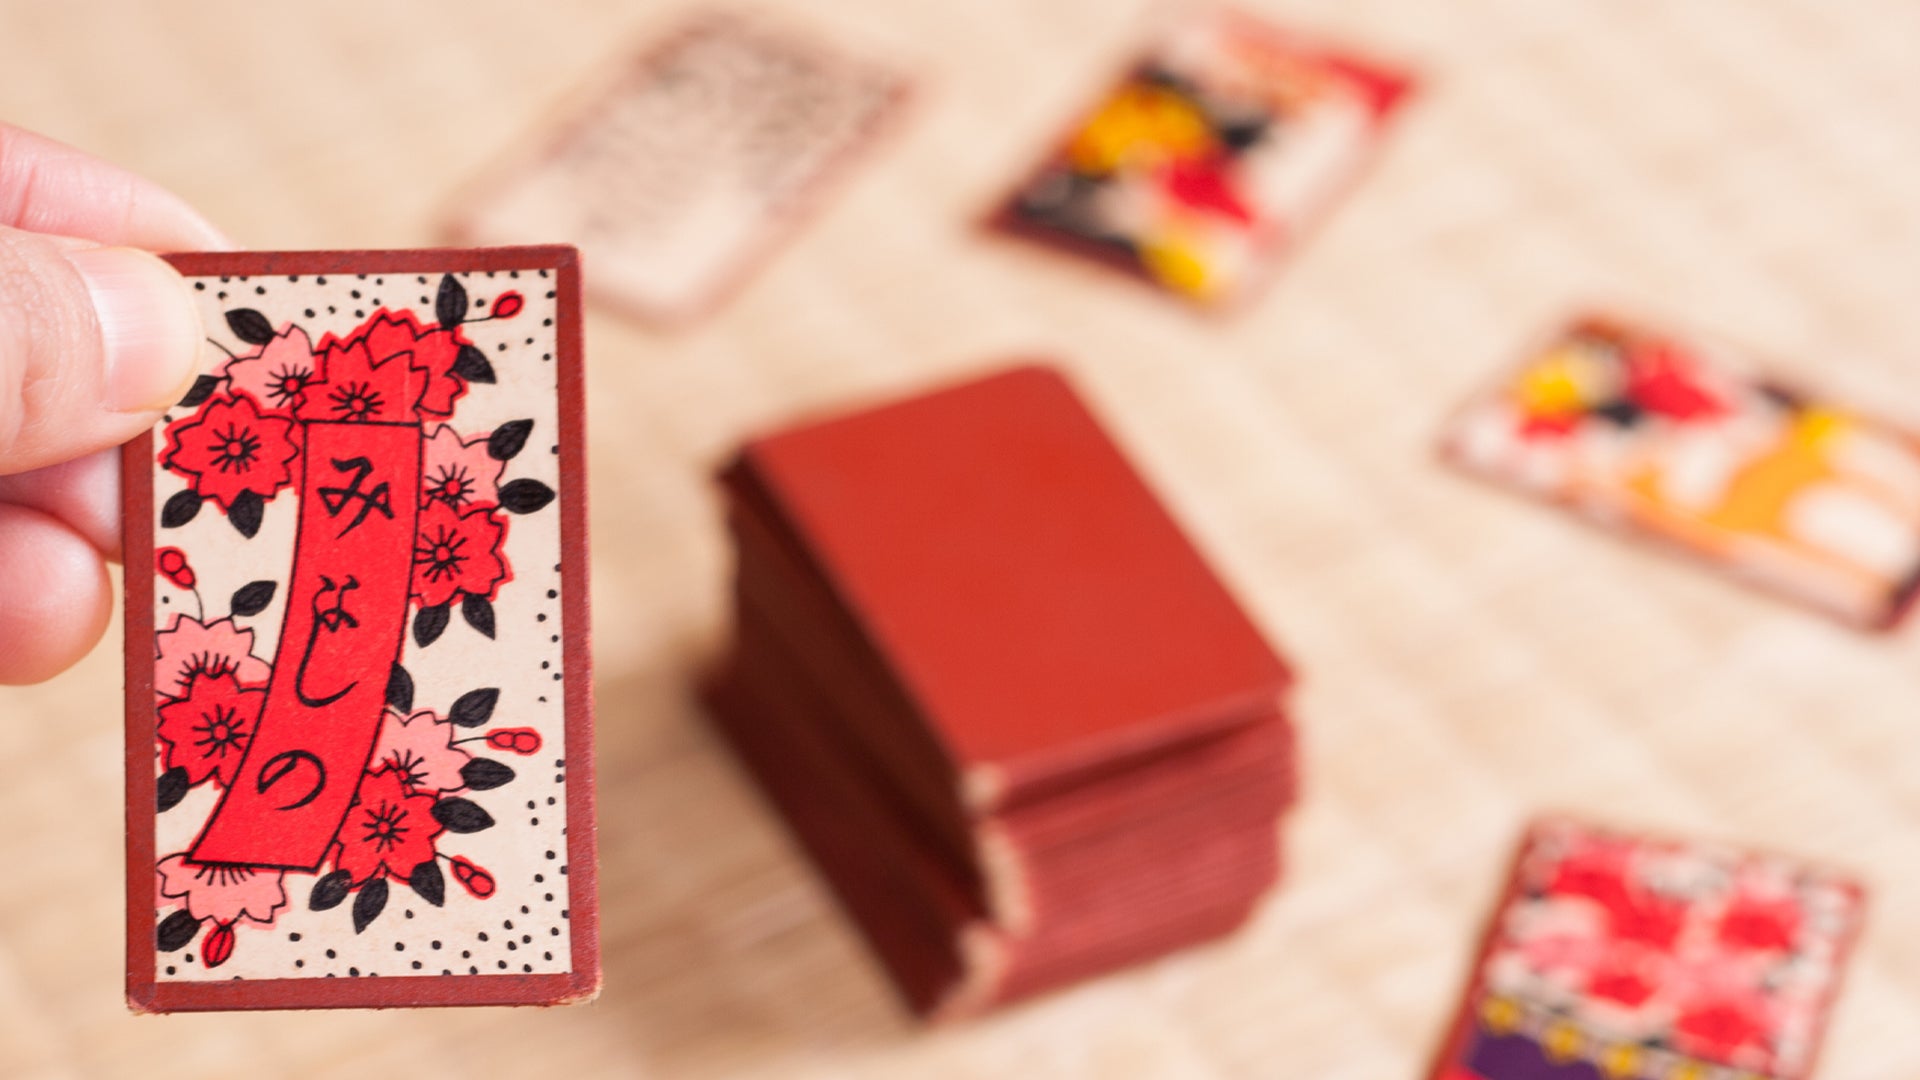 A Hanafuda card held in the foreground with a game being played in the background